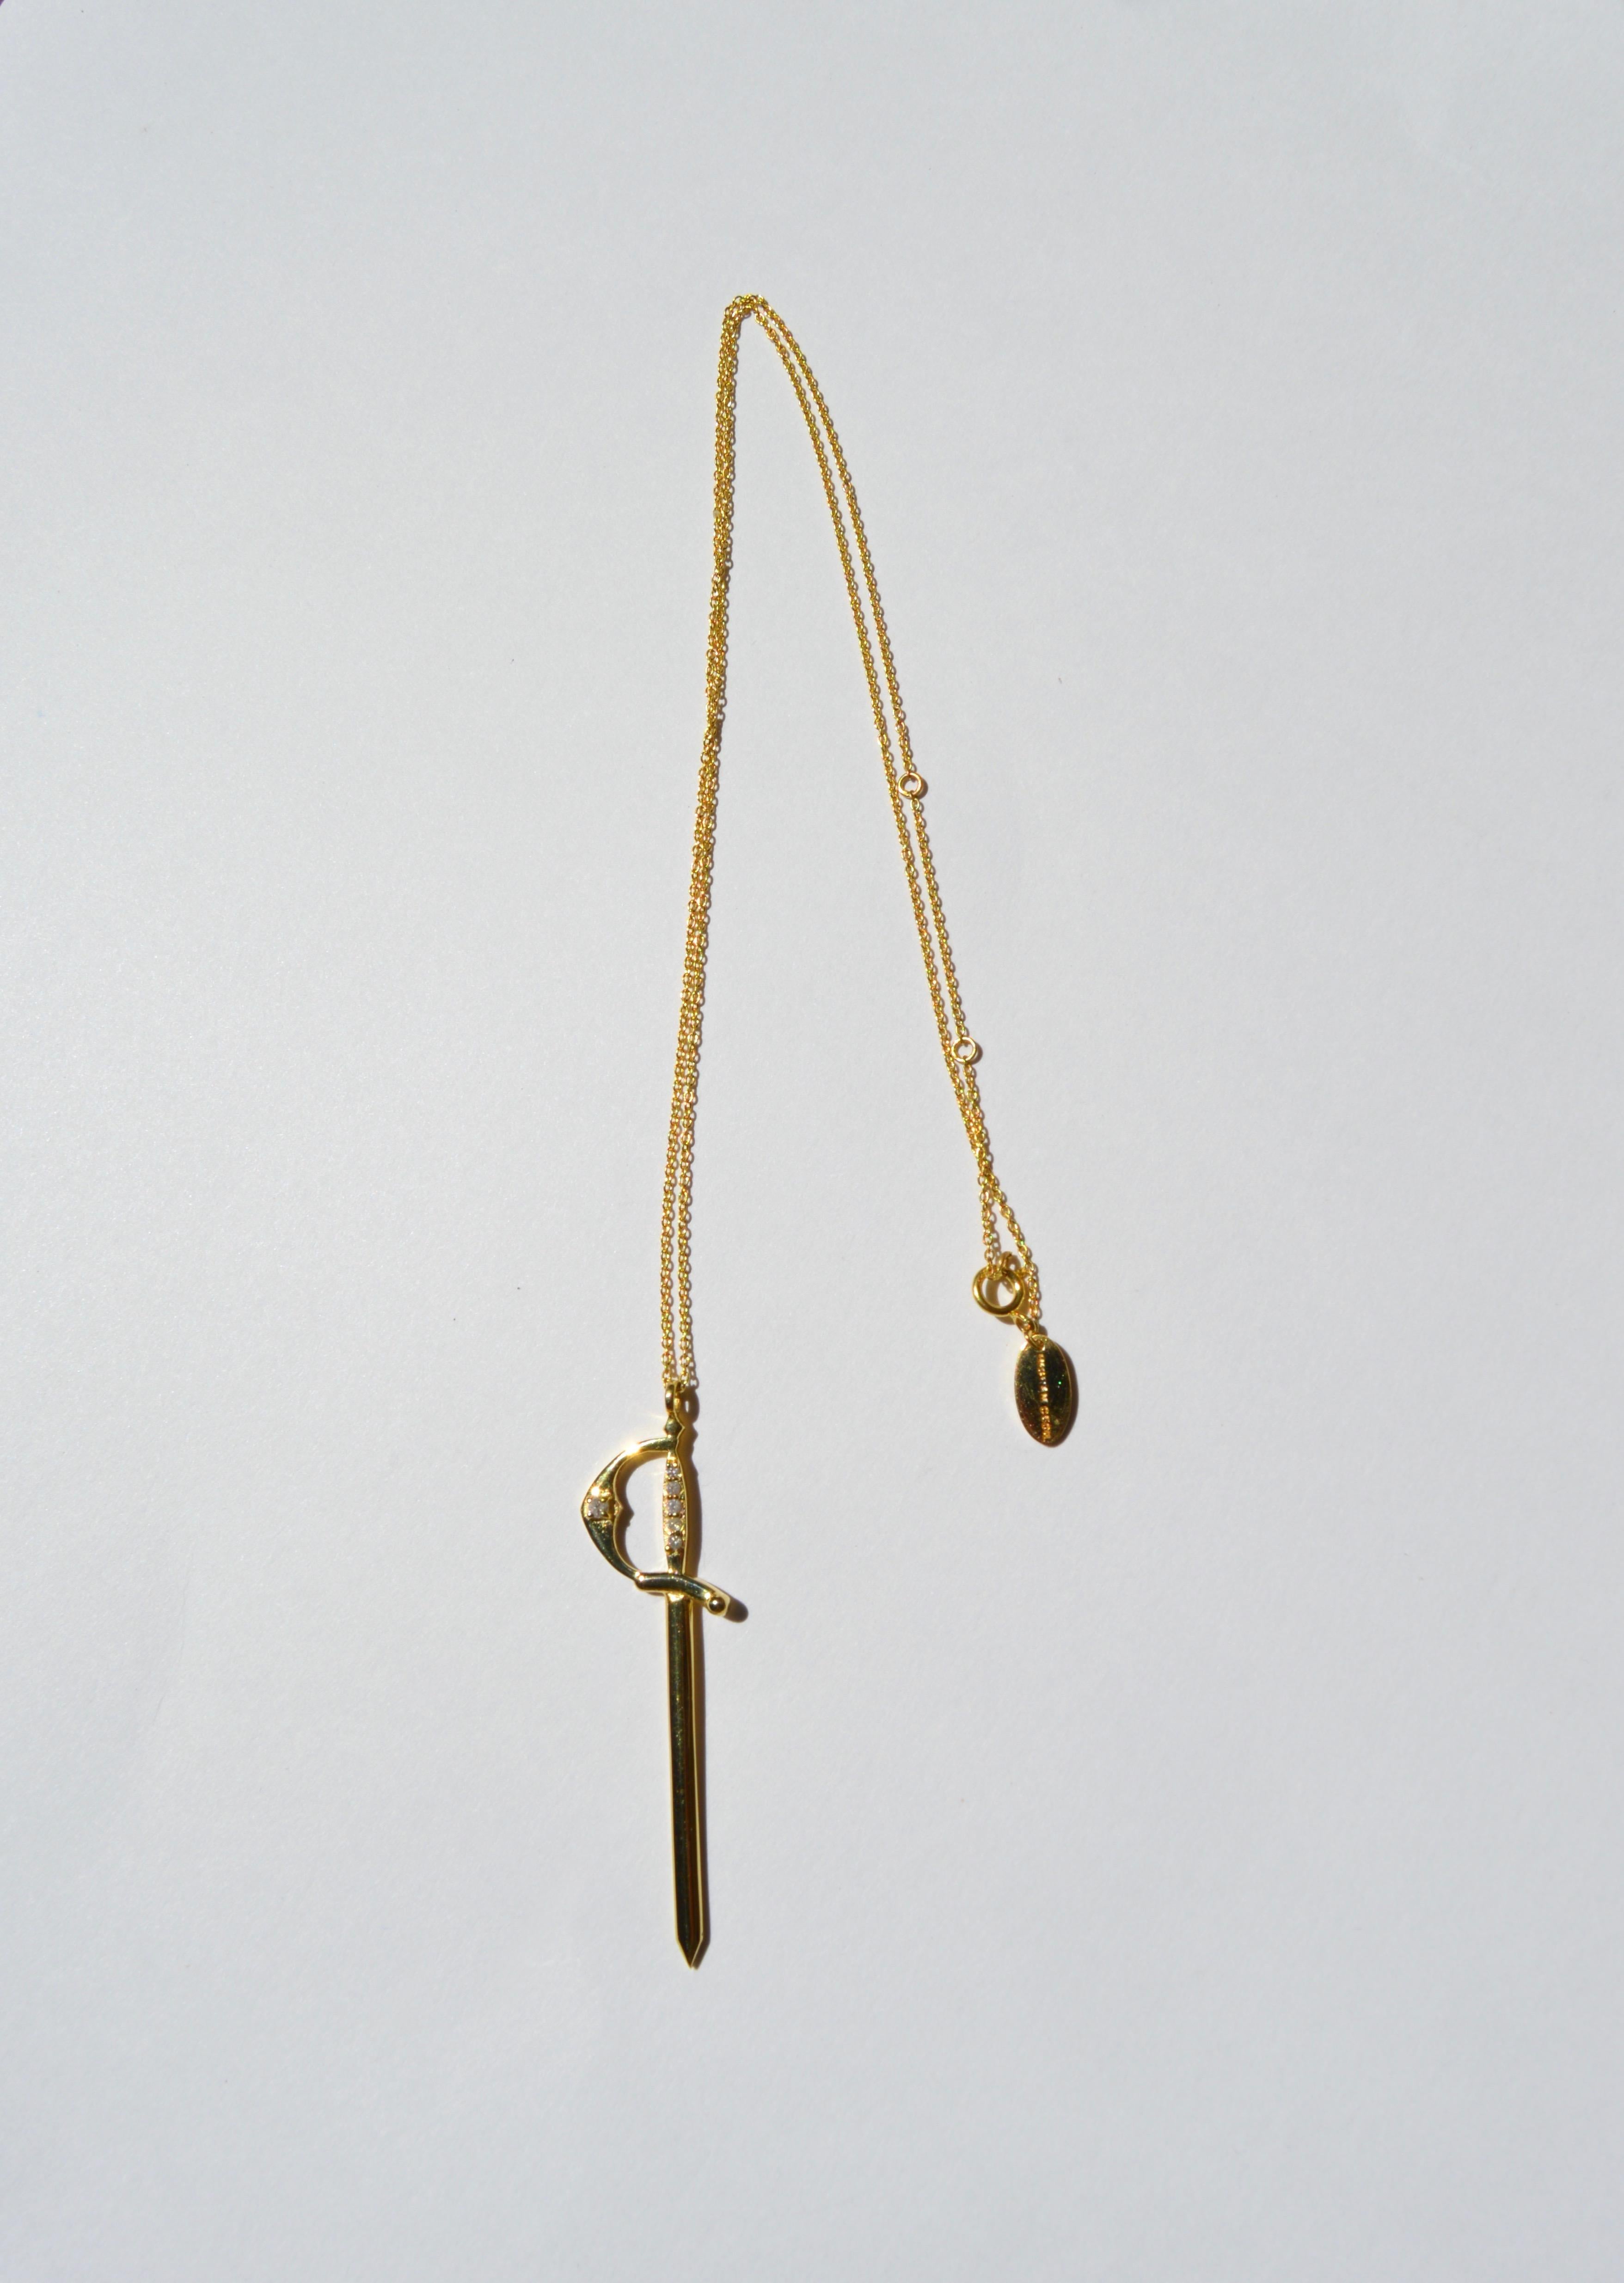 Solid 14K yellow gold and diamond sword pendant on an 18